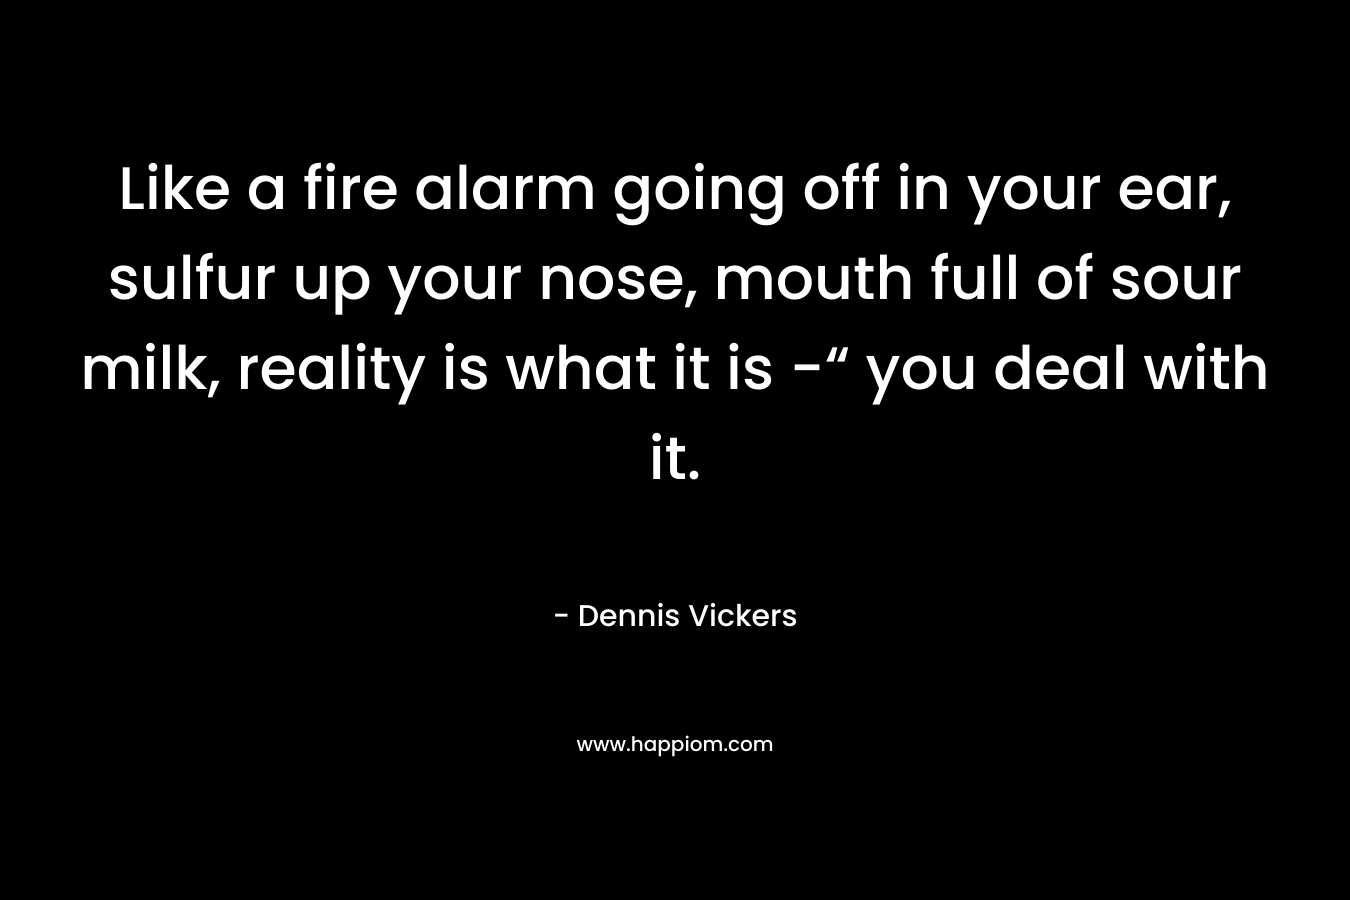 Like a fire alarm going off in your ear, sulfur up your nose, mouth full of sour milk, reality is what it is -“ you deal with it. – Dennis Vickers